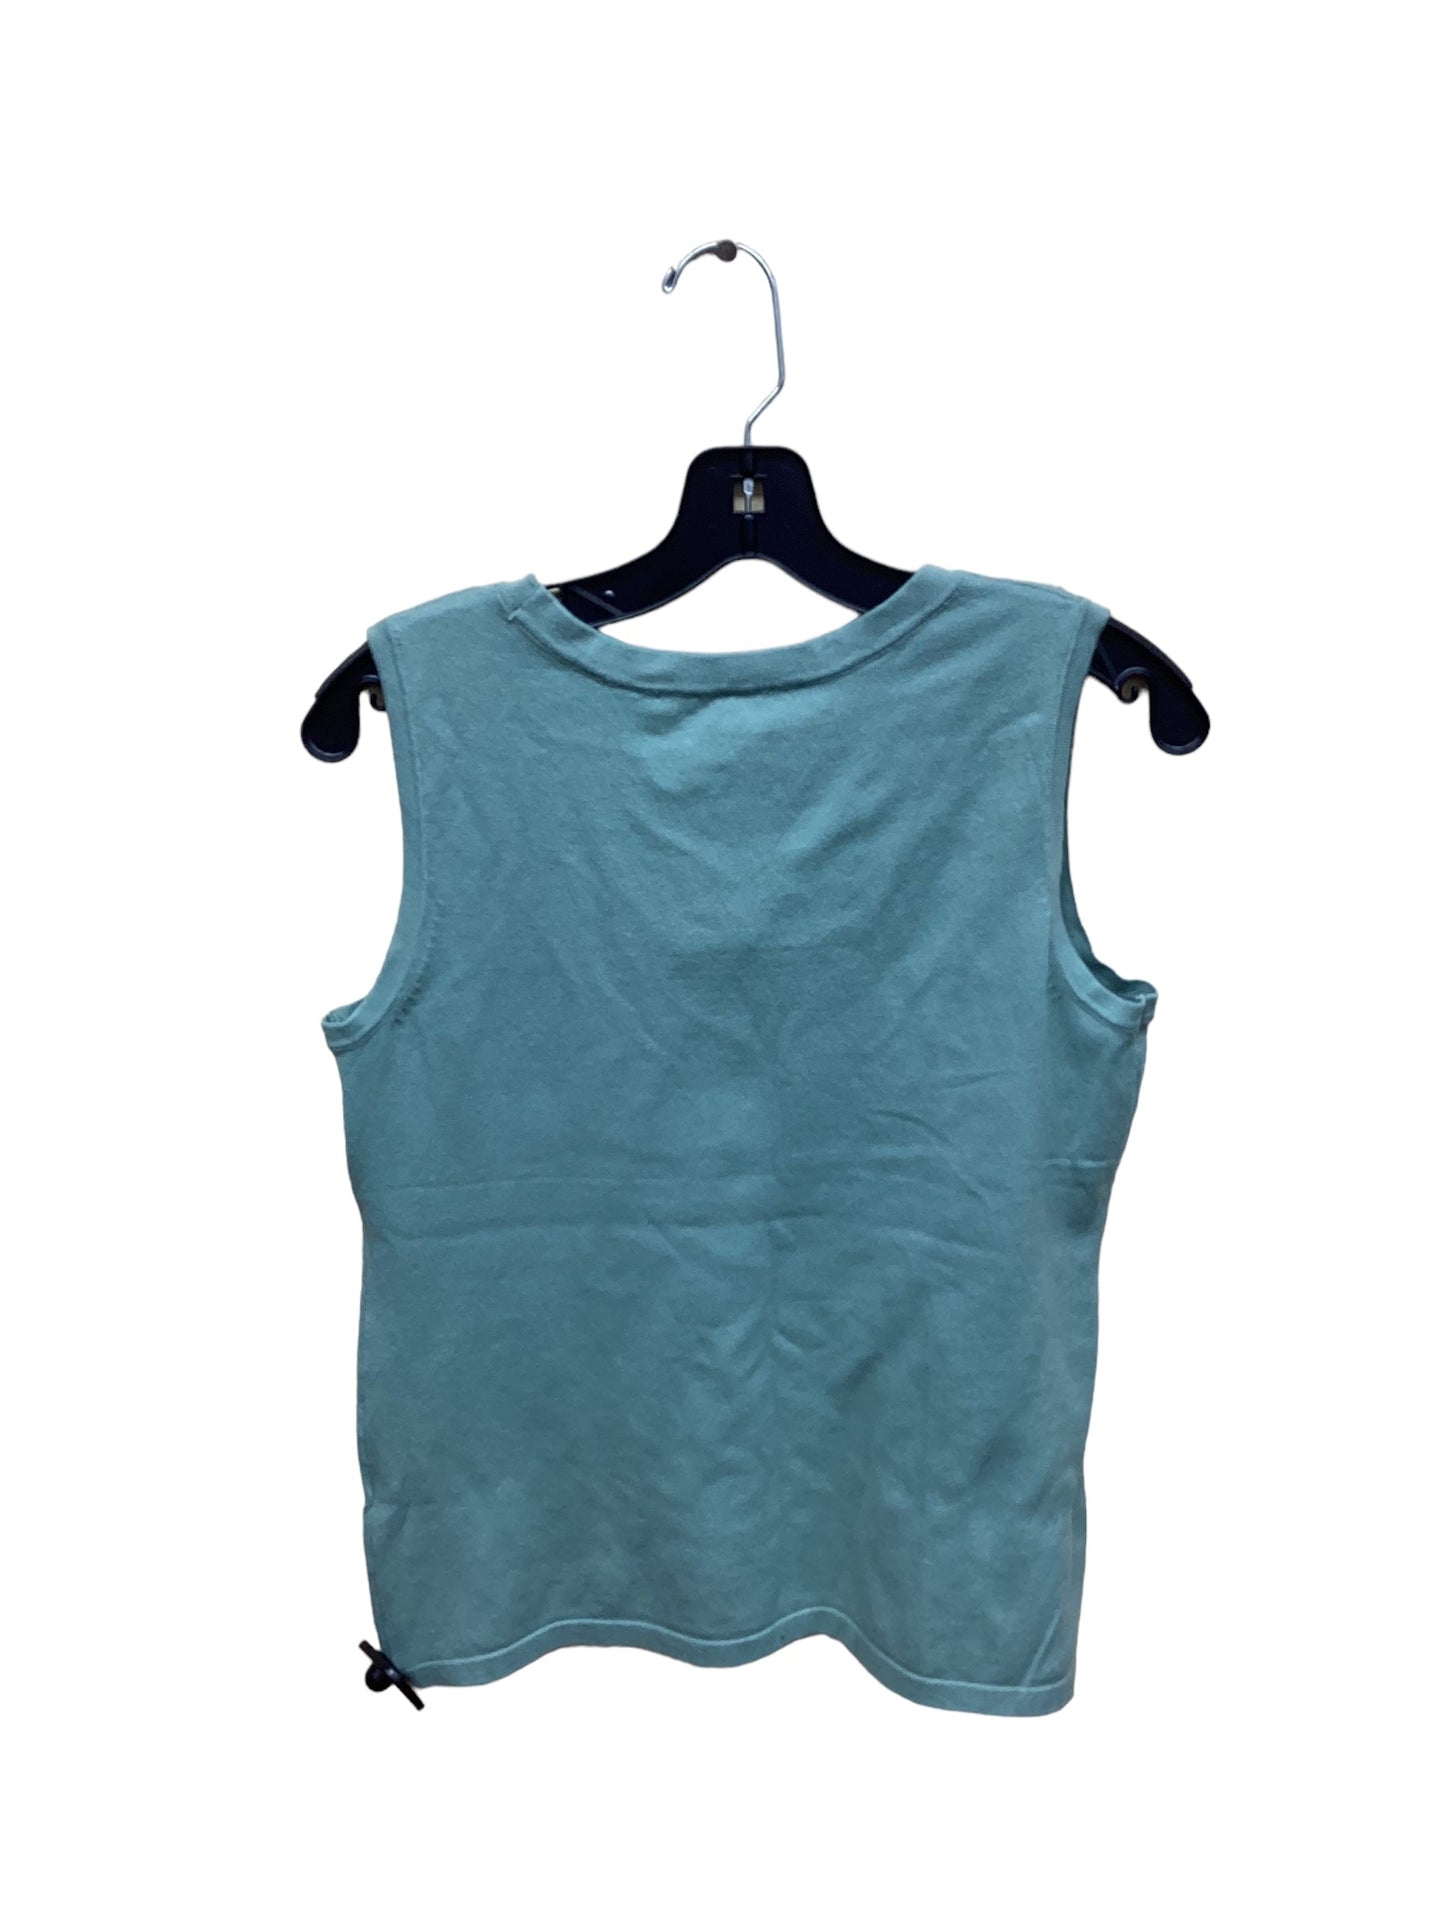 Green Top Sleeveless Christopher And Banks, Size S